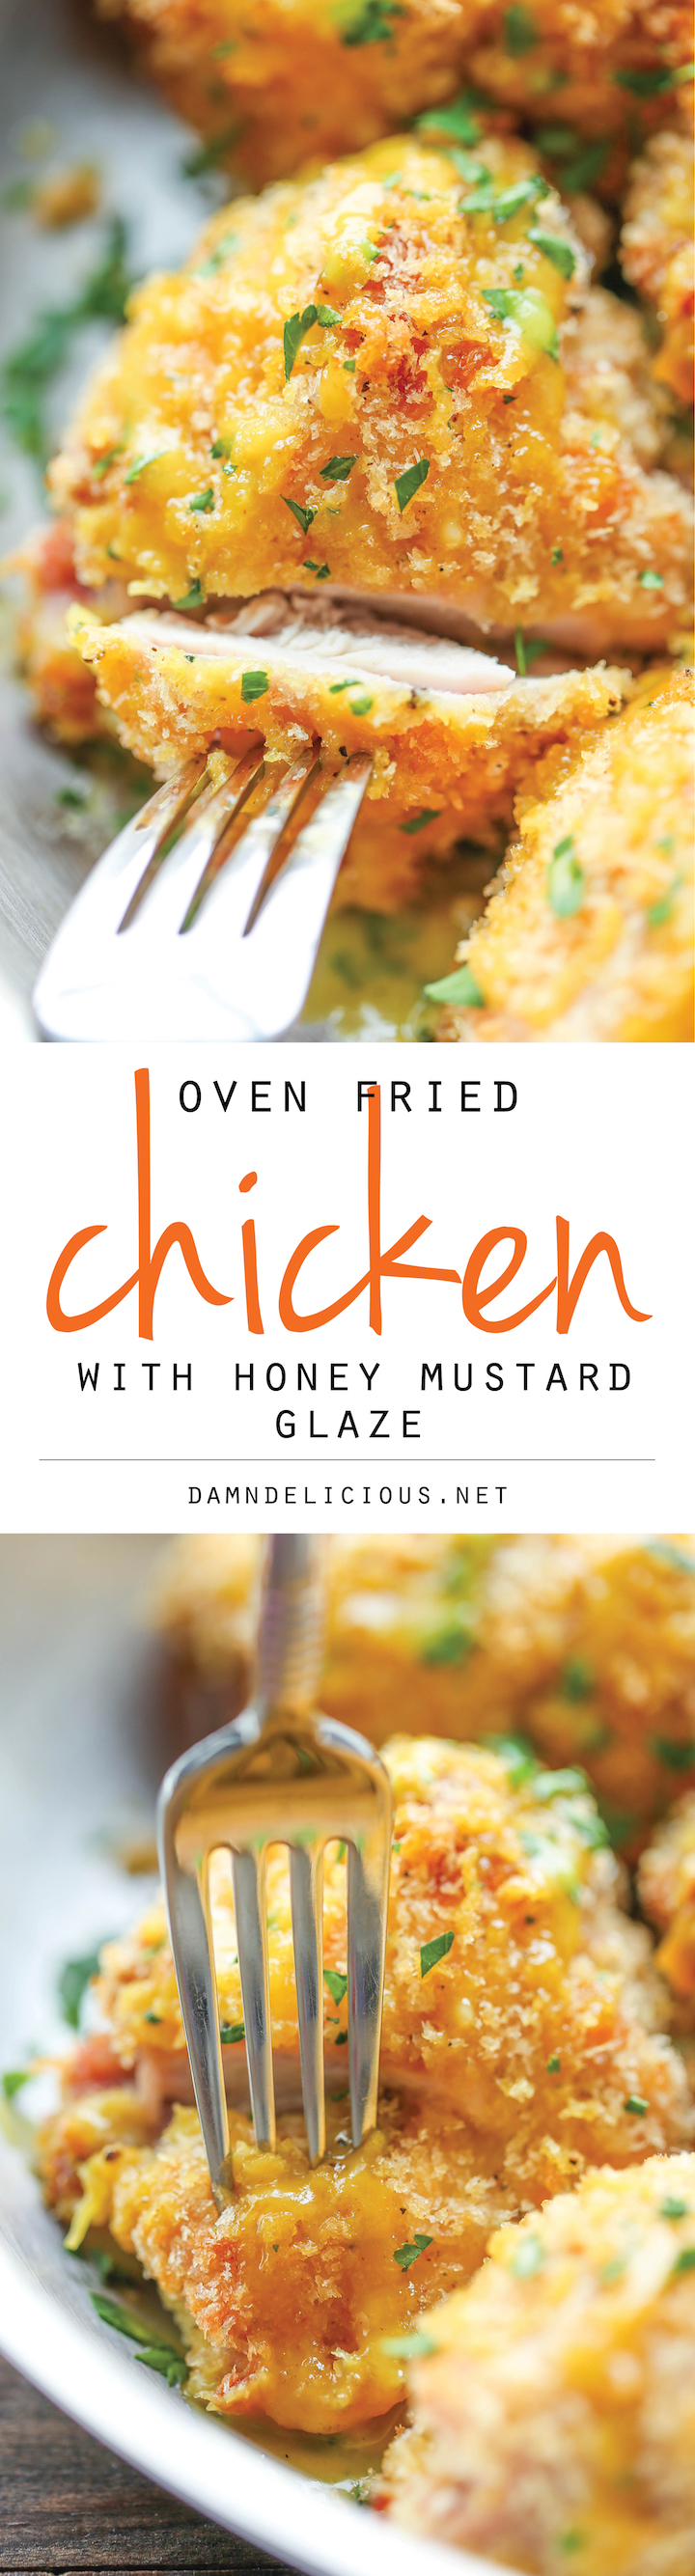 Oven Fried Chicken with Honey Mustard Glaze - No one would ever guess that this was baked, not fried. And the honey mustard glaze is to die for!